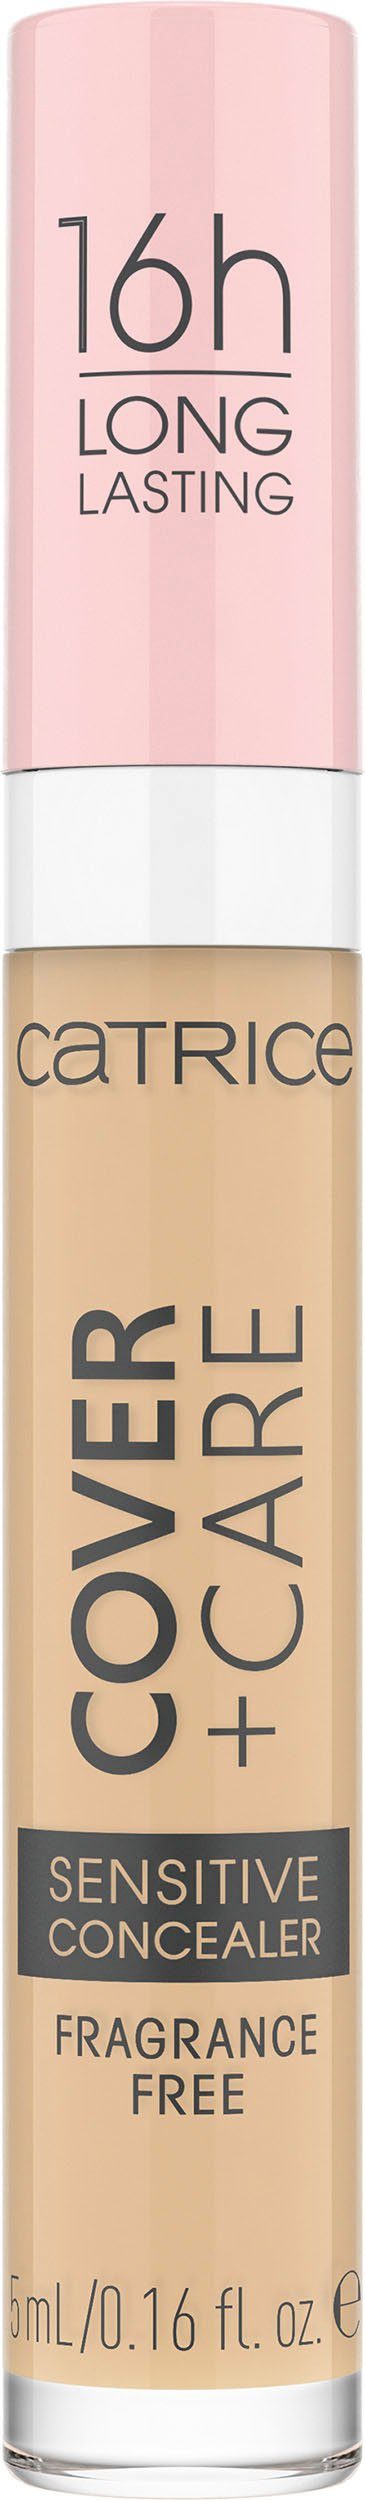 Catrice Concealer Catrice Cover Concealer, + 3-tlg. nude 008W Care Sensitive